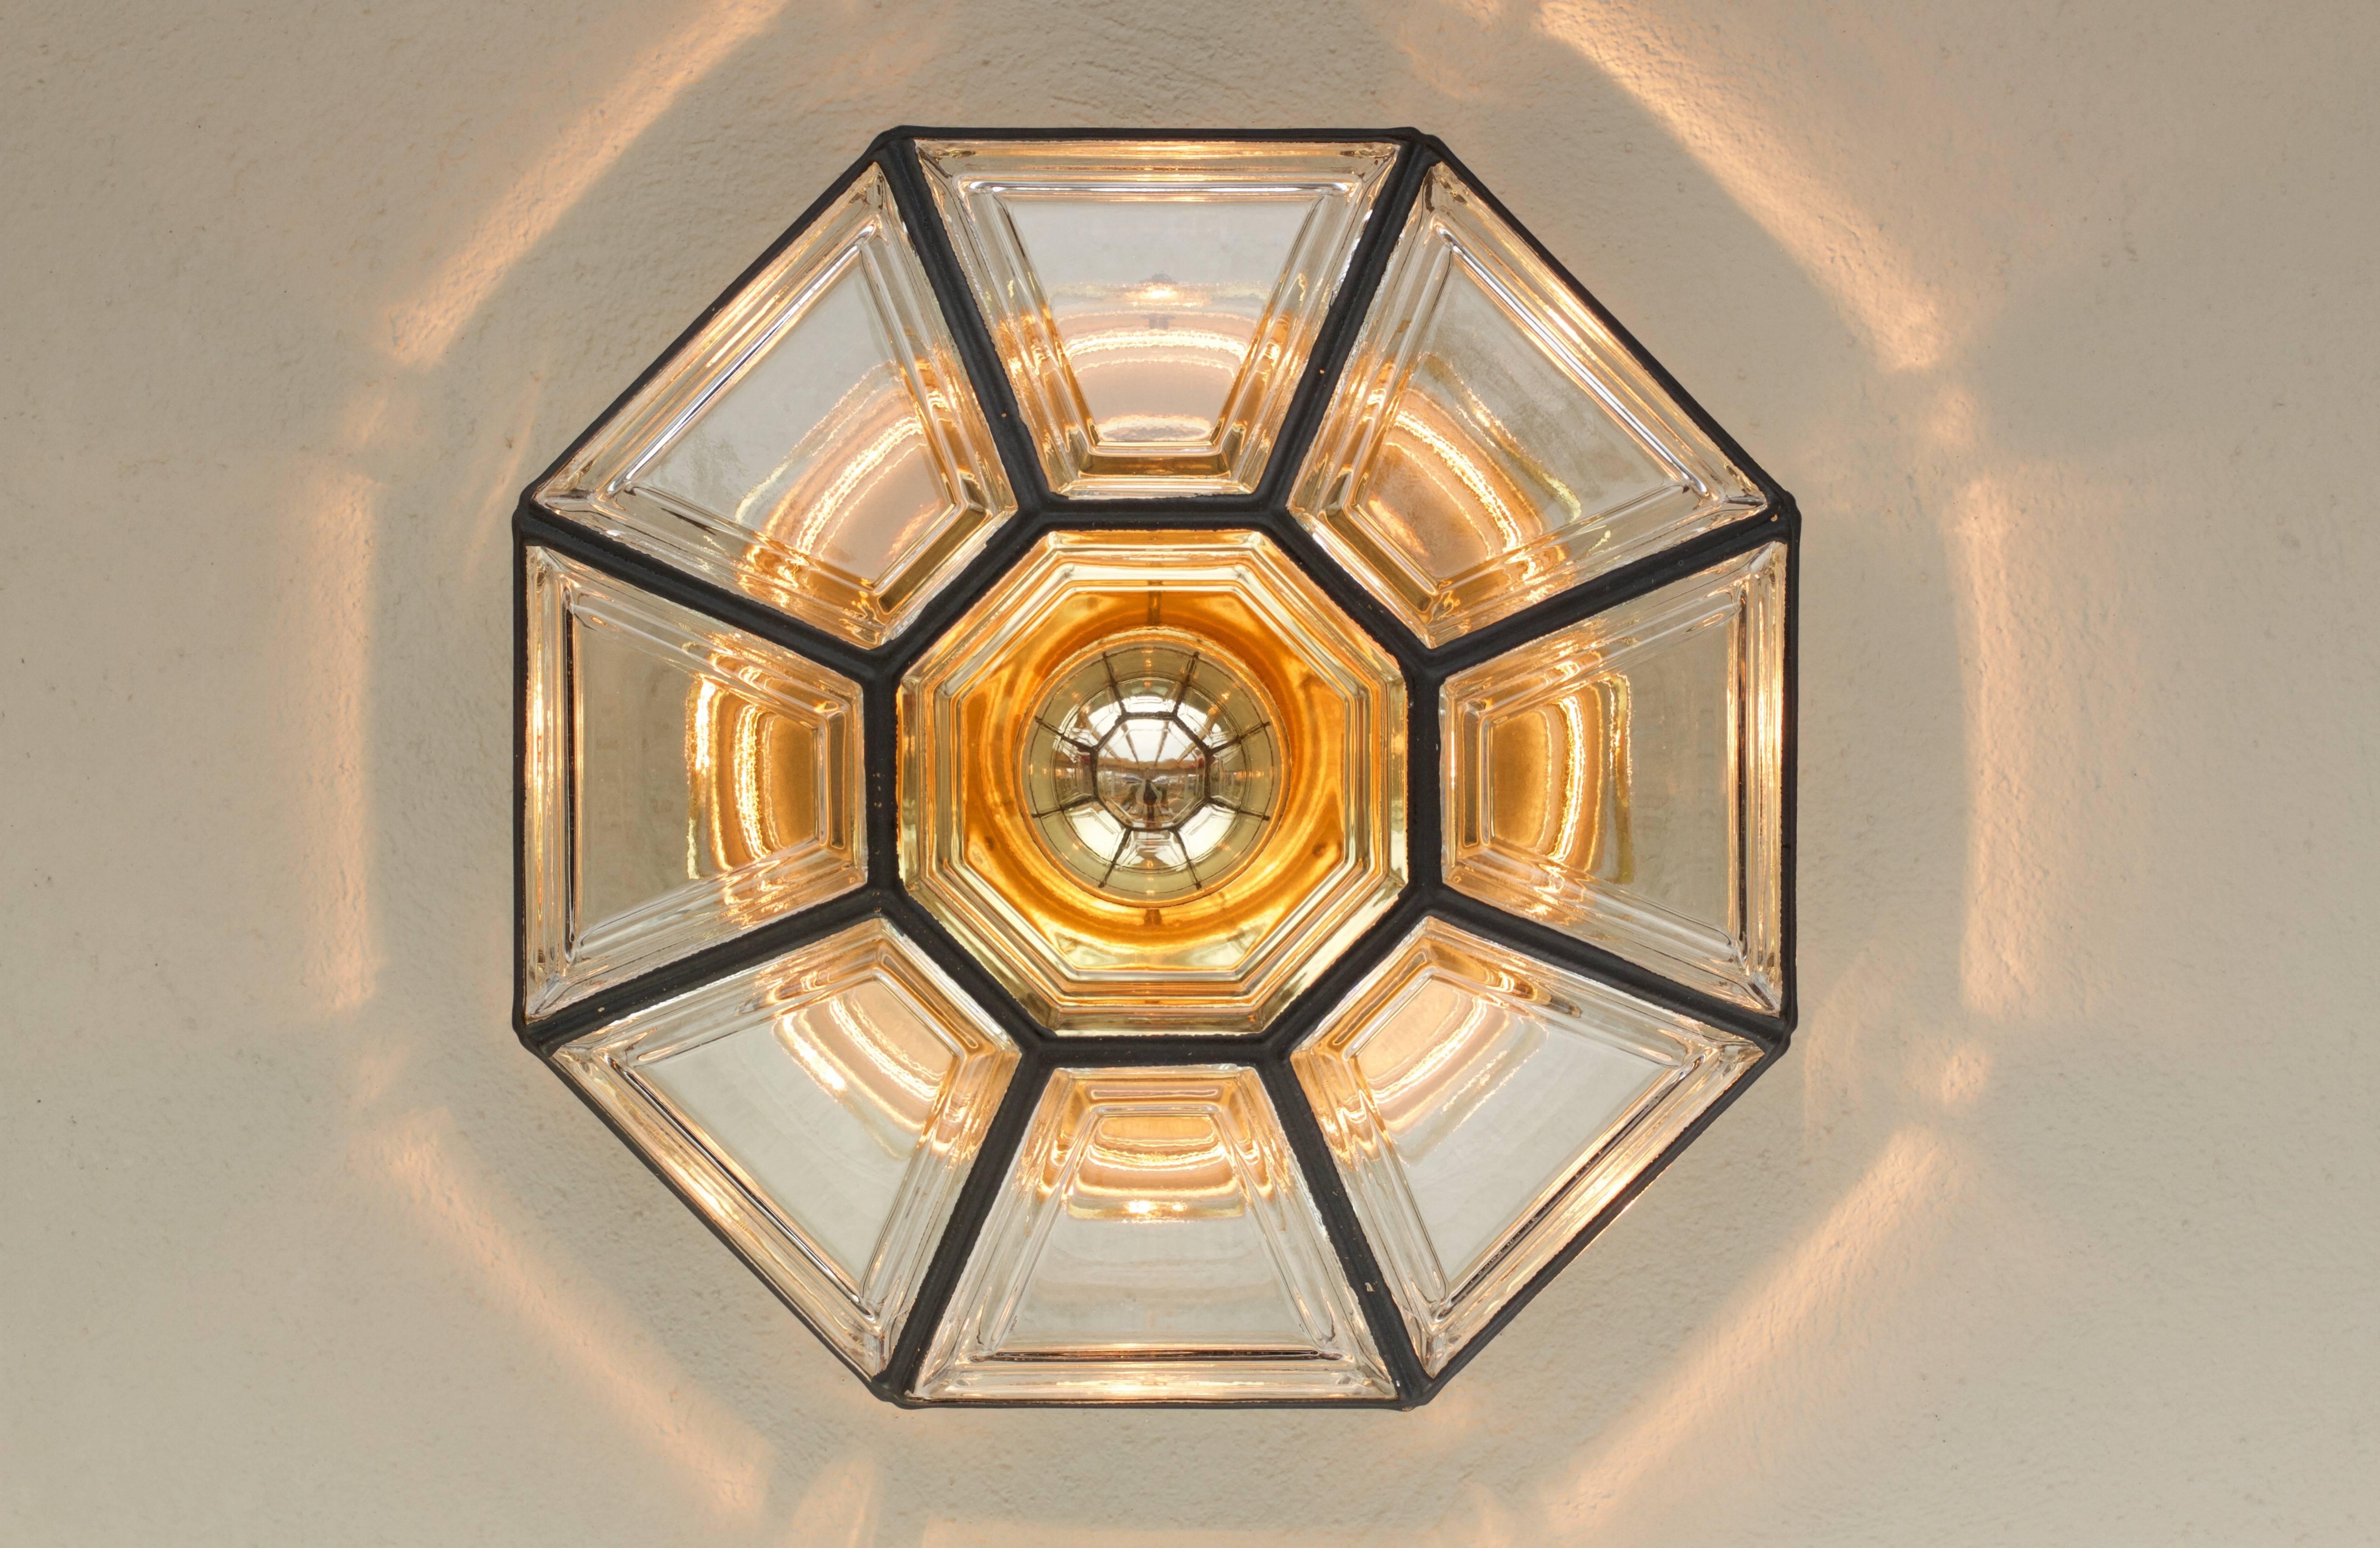 Vintage mid-century octagonally shaped, Minimalist German made flush mount light fixture produced by Glashütte Limburg, circa 1965. This Contemporary Art Deco and lantern style Plafonnier casts a fantastic light when mounted on the ceiling or wall